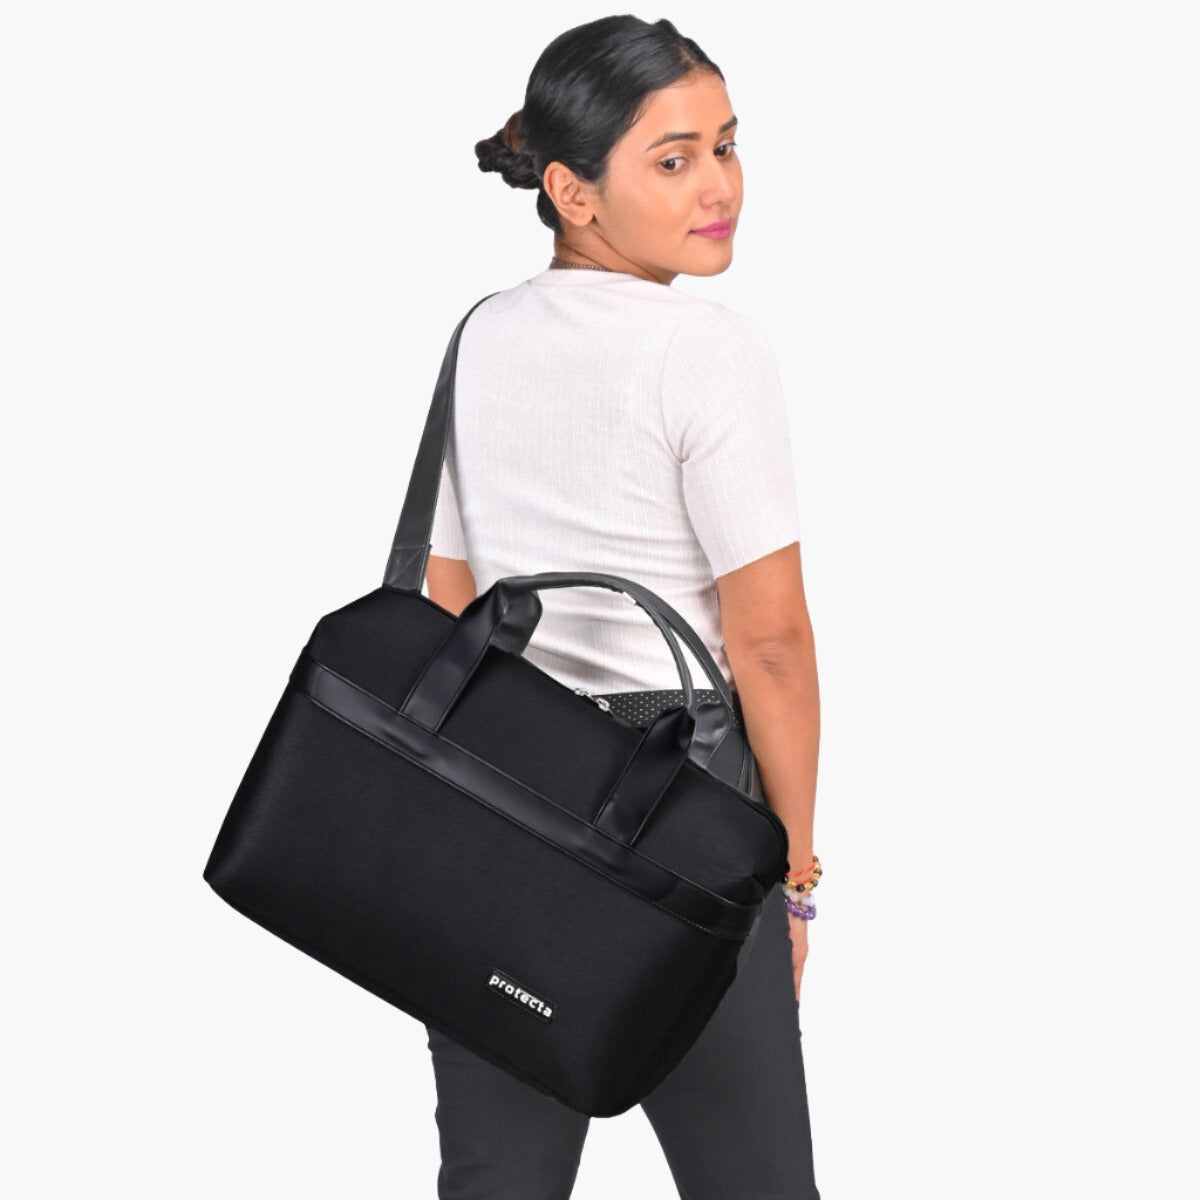 Black | Protecta Early Lead Anti-Theft Office Laptop Bag - 3